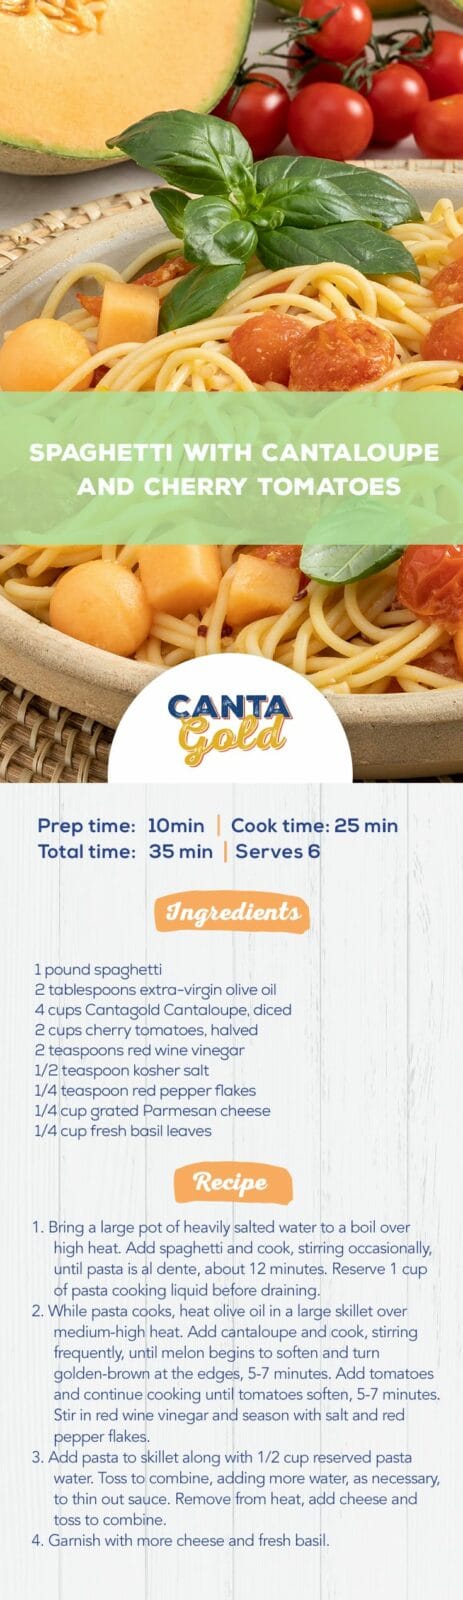 CantaGold_PinterestPinPinterest_Spaghetti with Sautéed Cantaloupe and Cherry Tomatoes